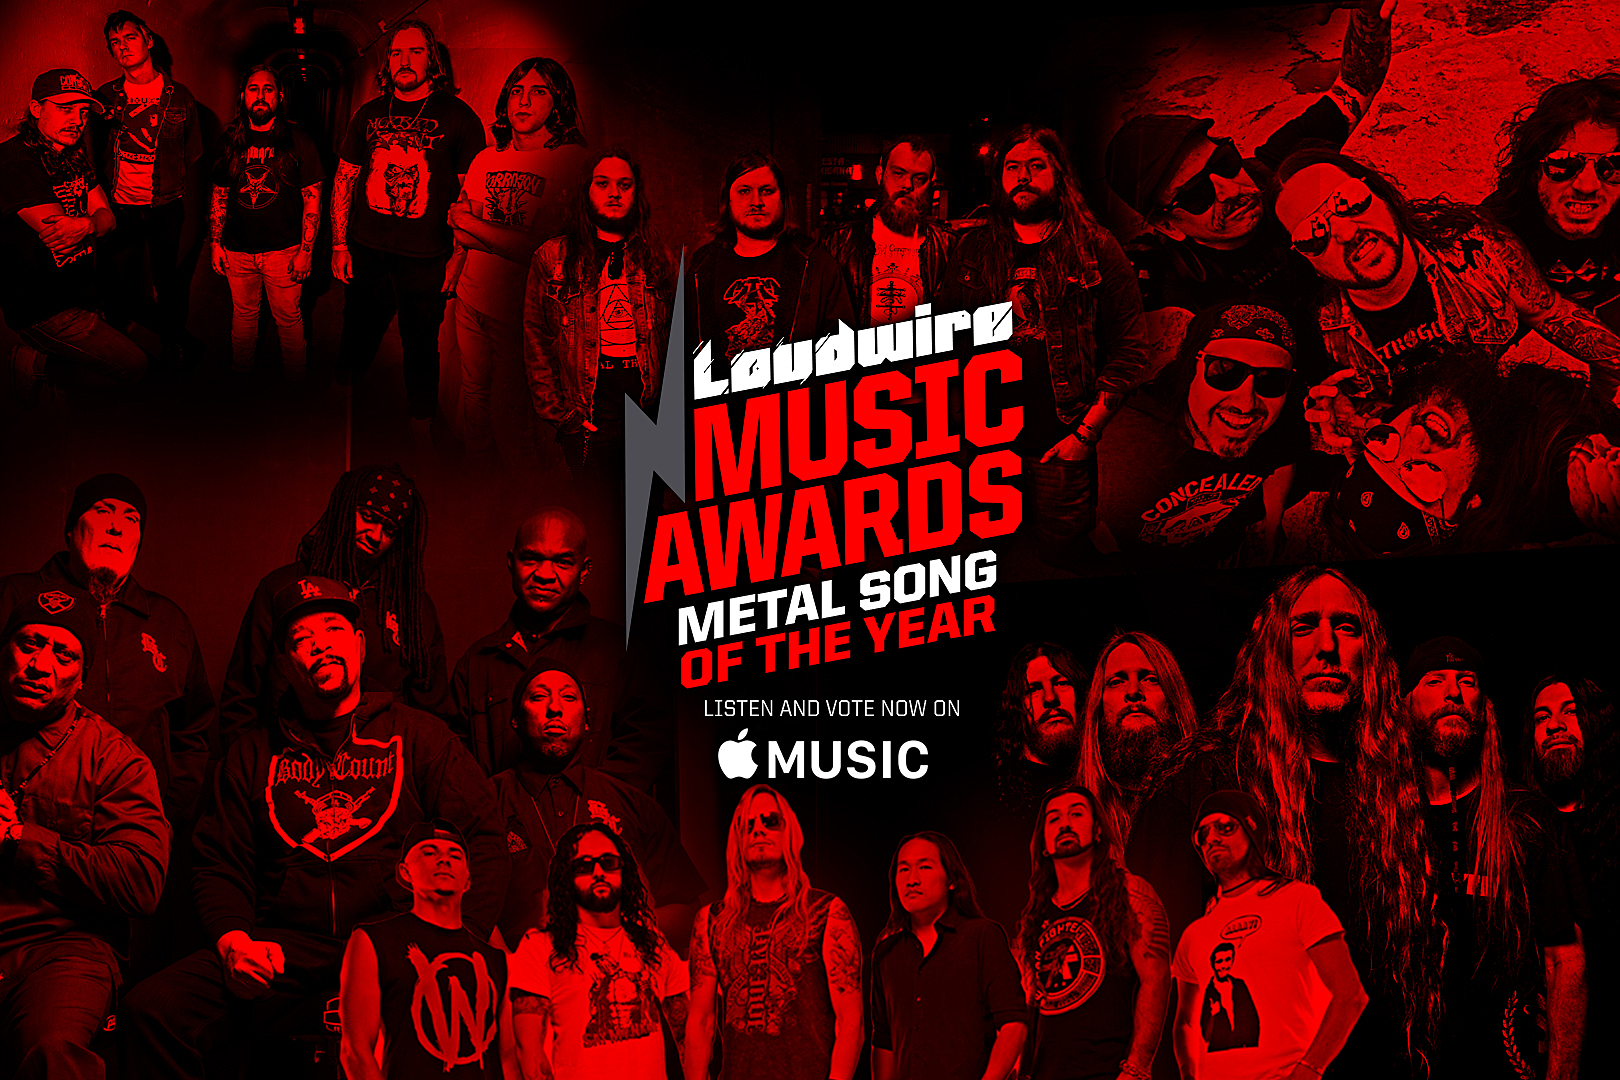 Vote for the Metal Song of the Year – 2017 Loudwire Music Awards